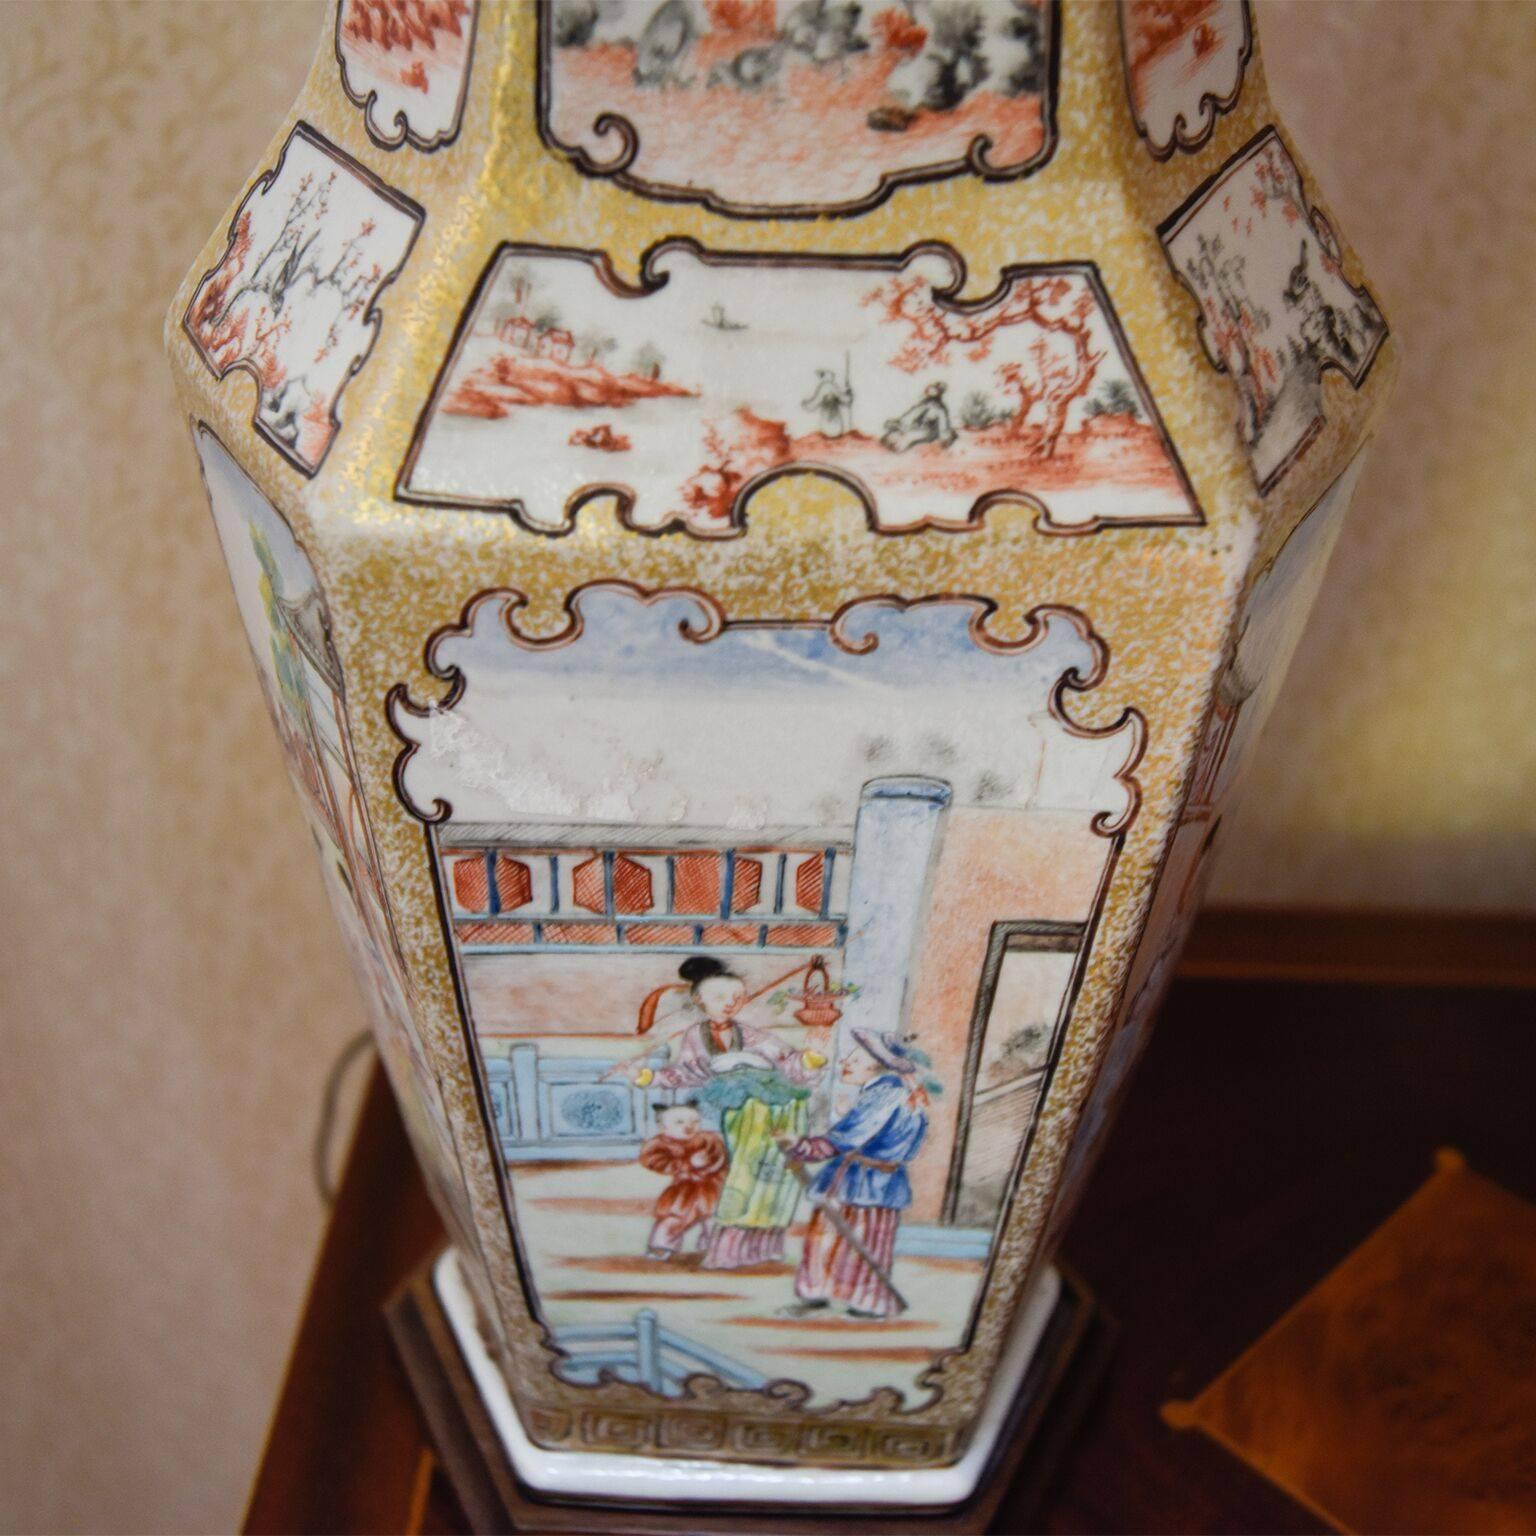 These lovely 19th century Chinese vases that were converted to table lamps are hand-painted with a detailed design of family figures in a home setting surrounded by various bird and outdoor motifs. The vases are colorful with a predominately gold